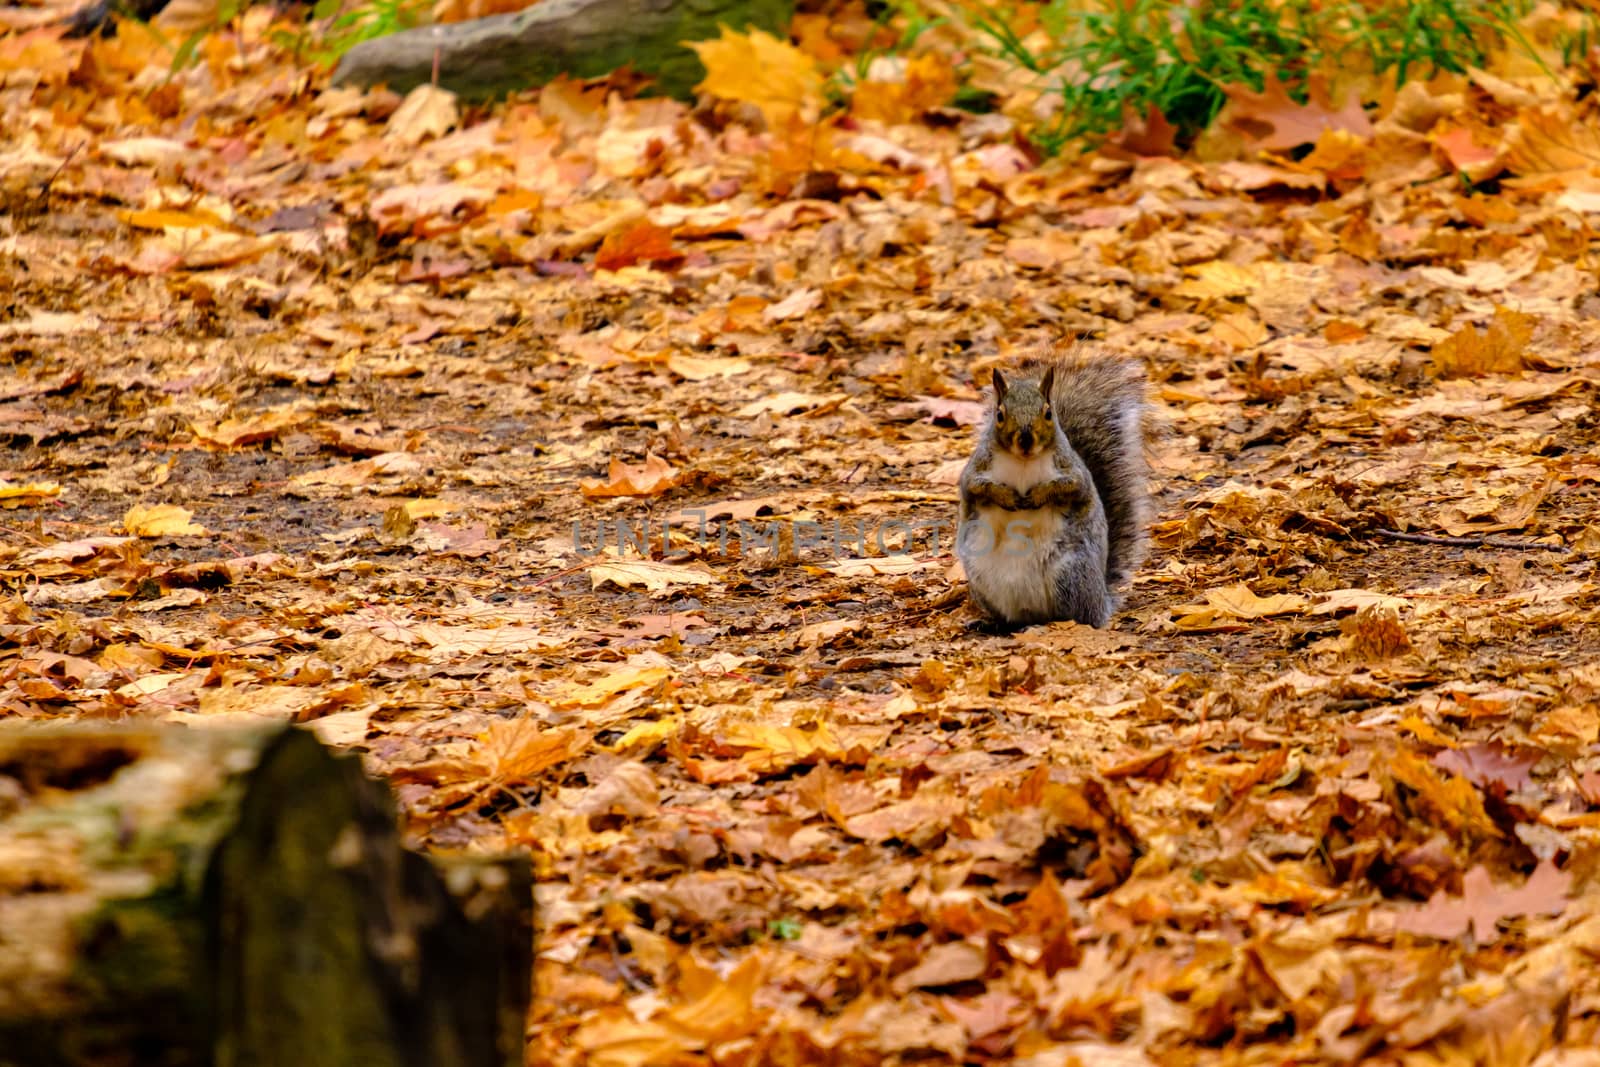 Grey squirrel among autumn leaves by colintemple